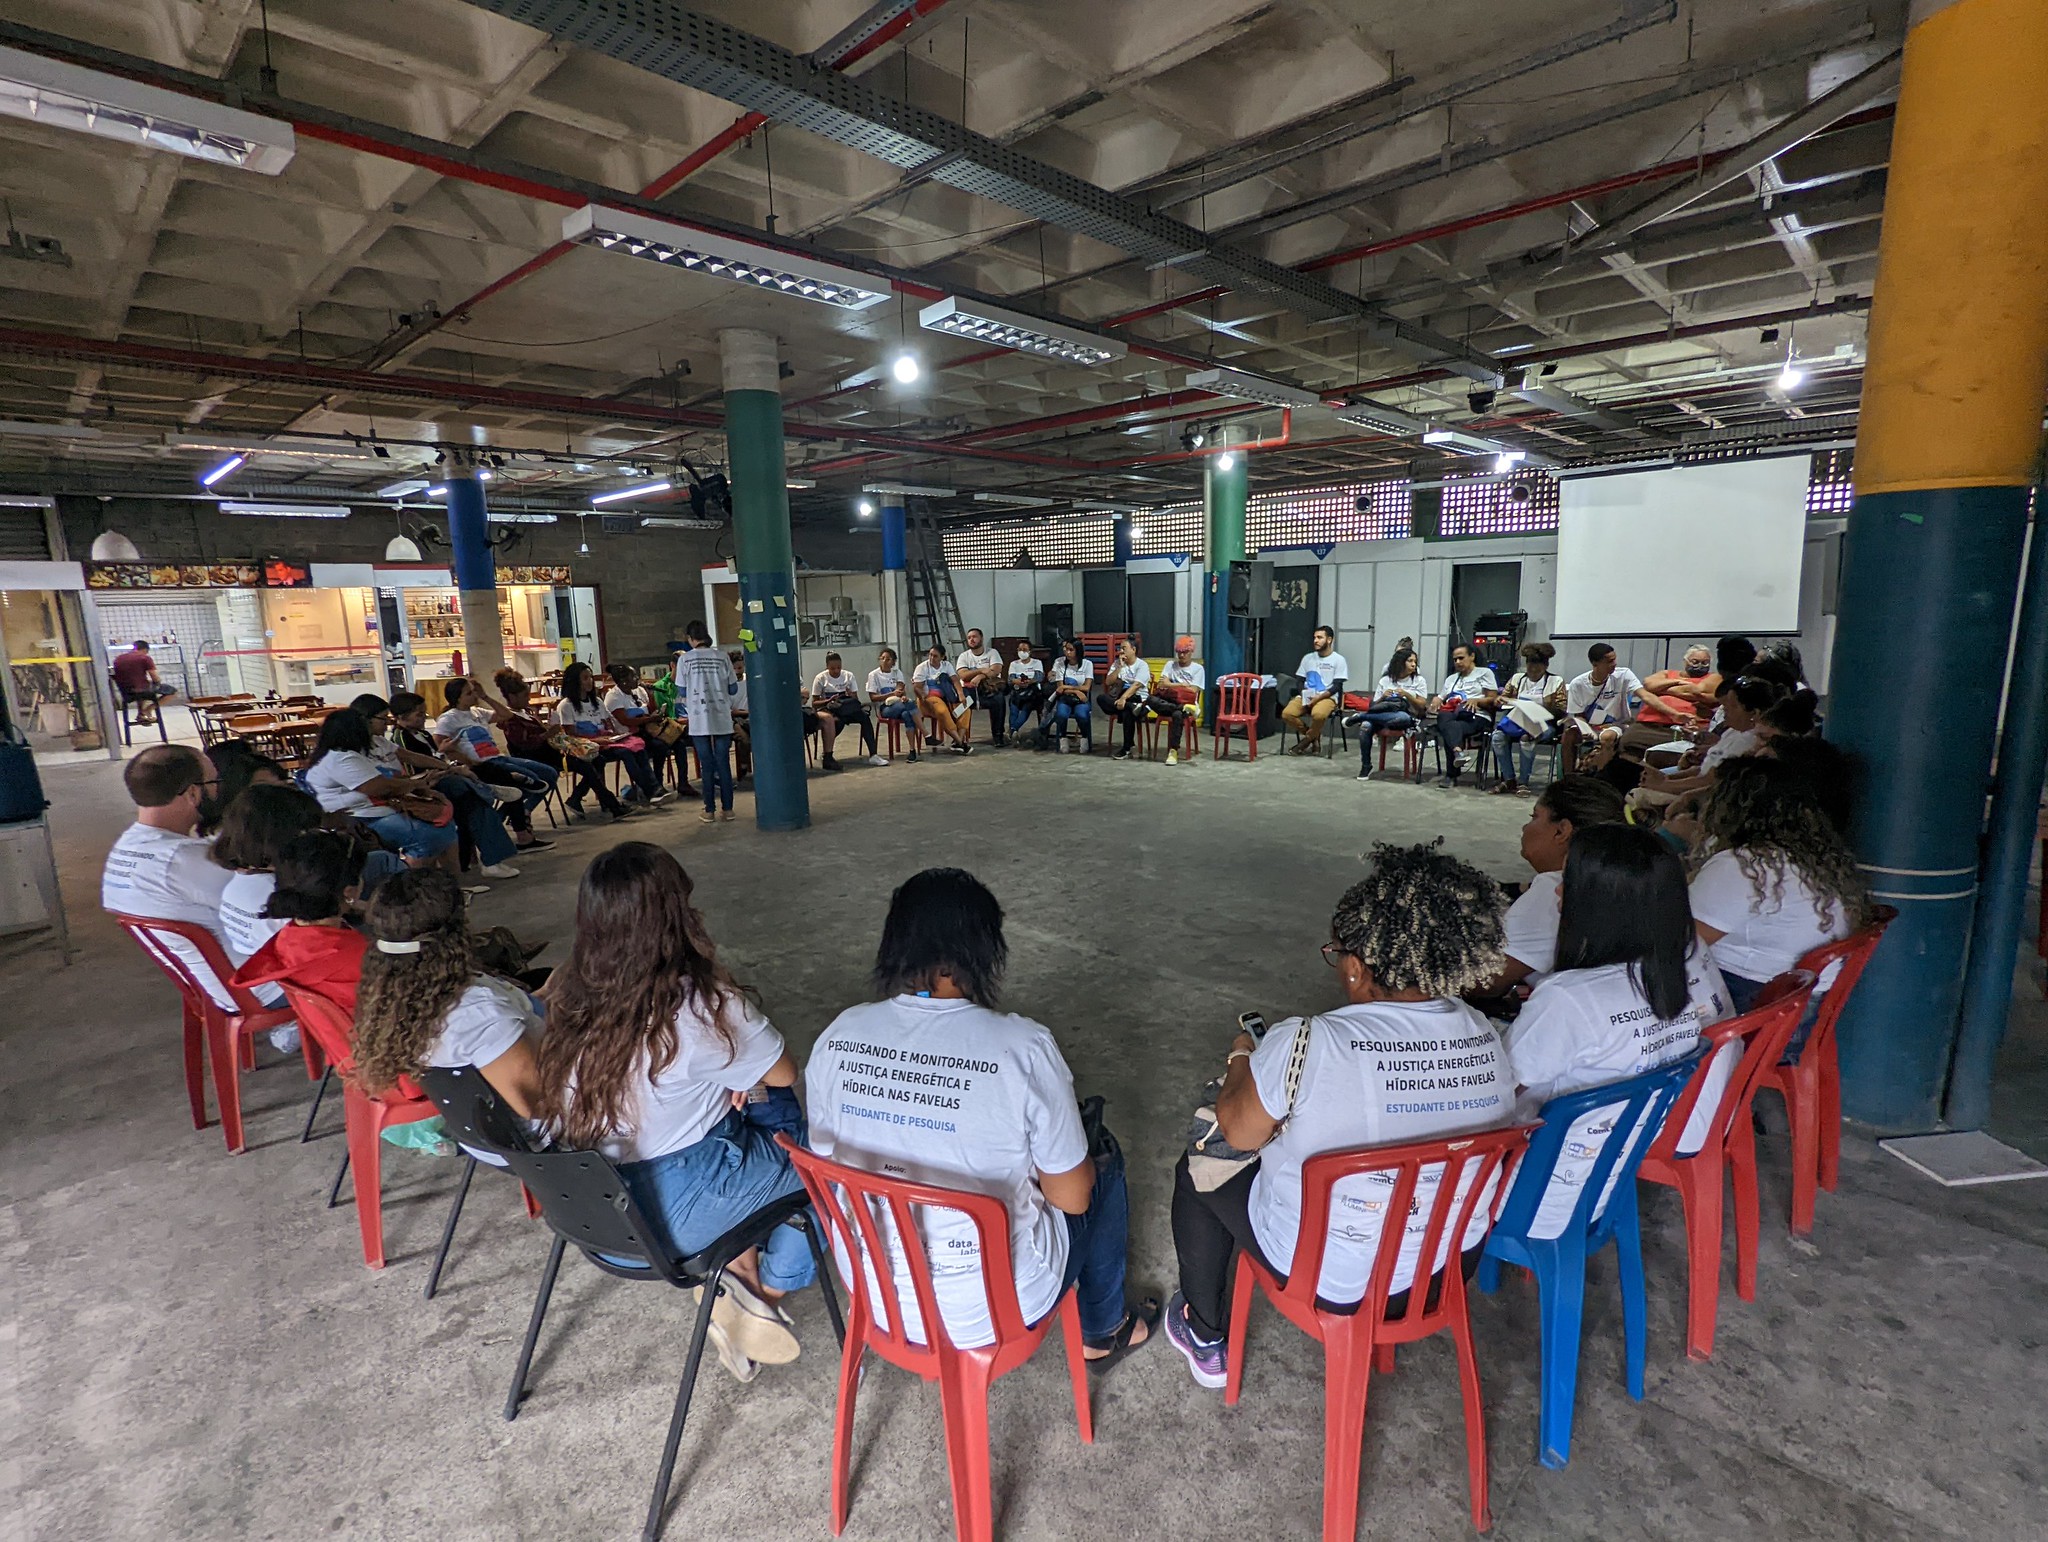 "Researching and Monitoring Water and Energy Justice in the Favelas" Course at SOS Providência. Photo: Luiza de Andrade